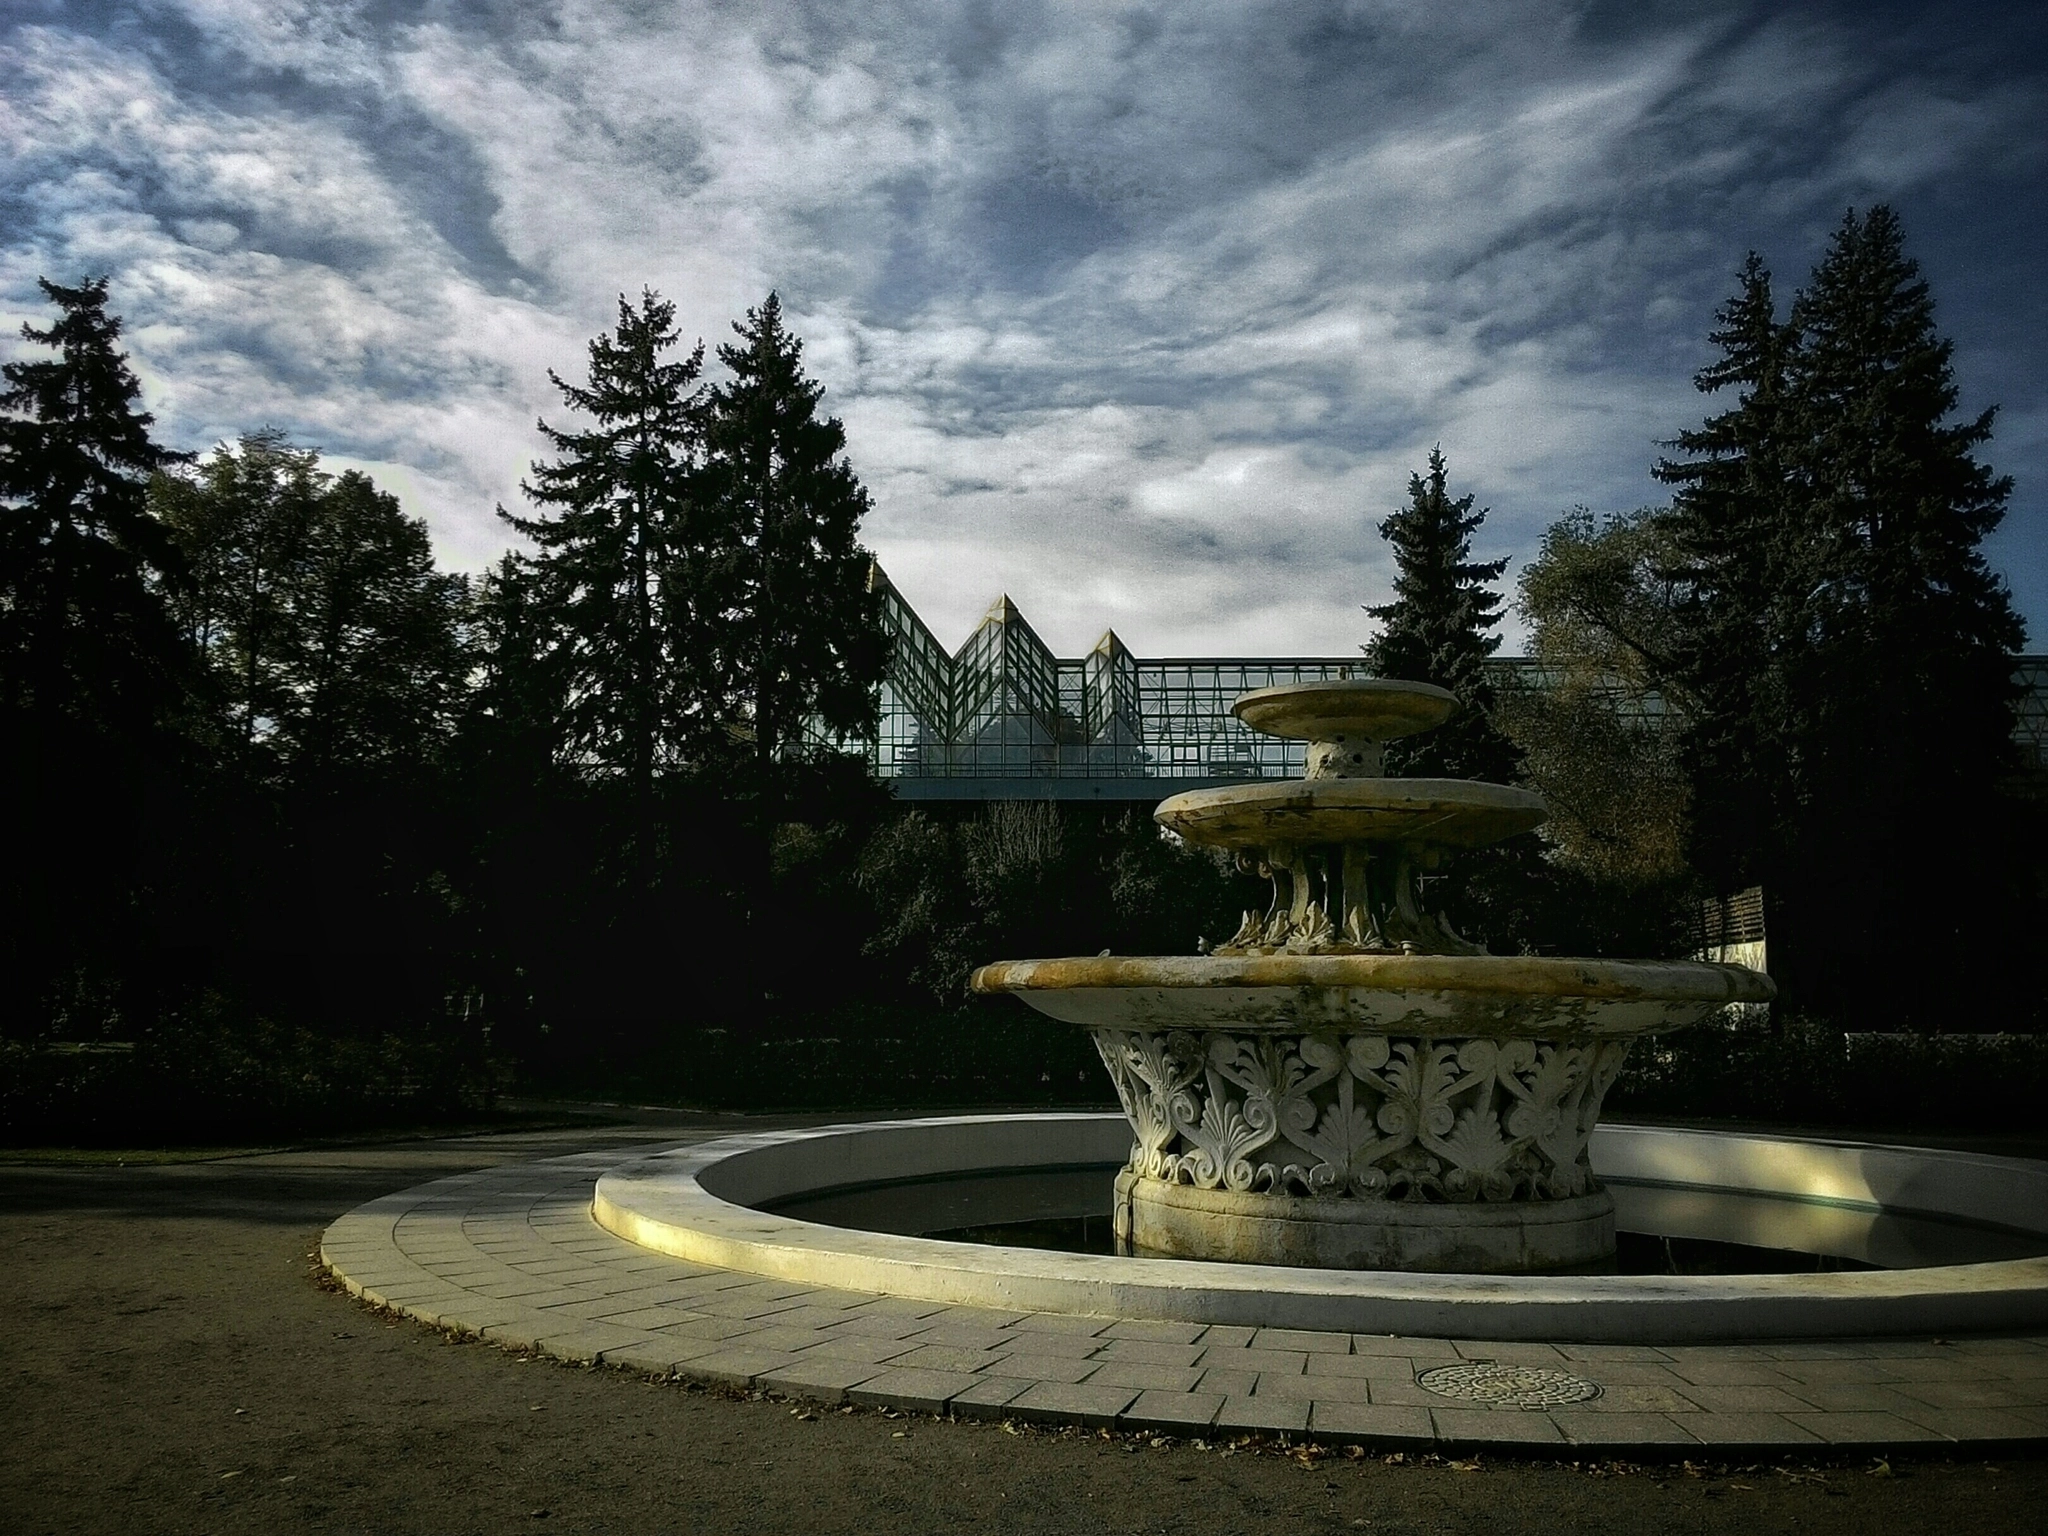 ASUS ZenFone 2 (ZE500CL) sample photo. Fountain in a park photography